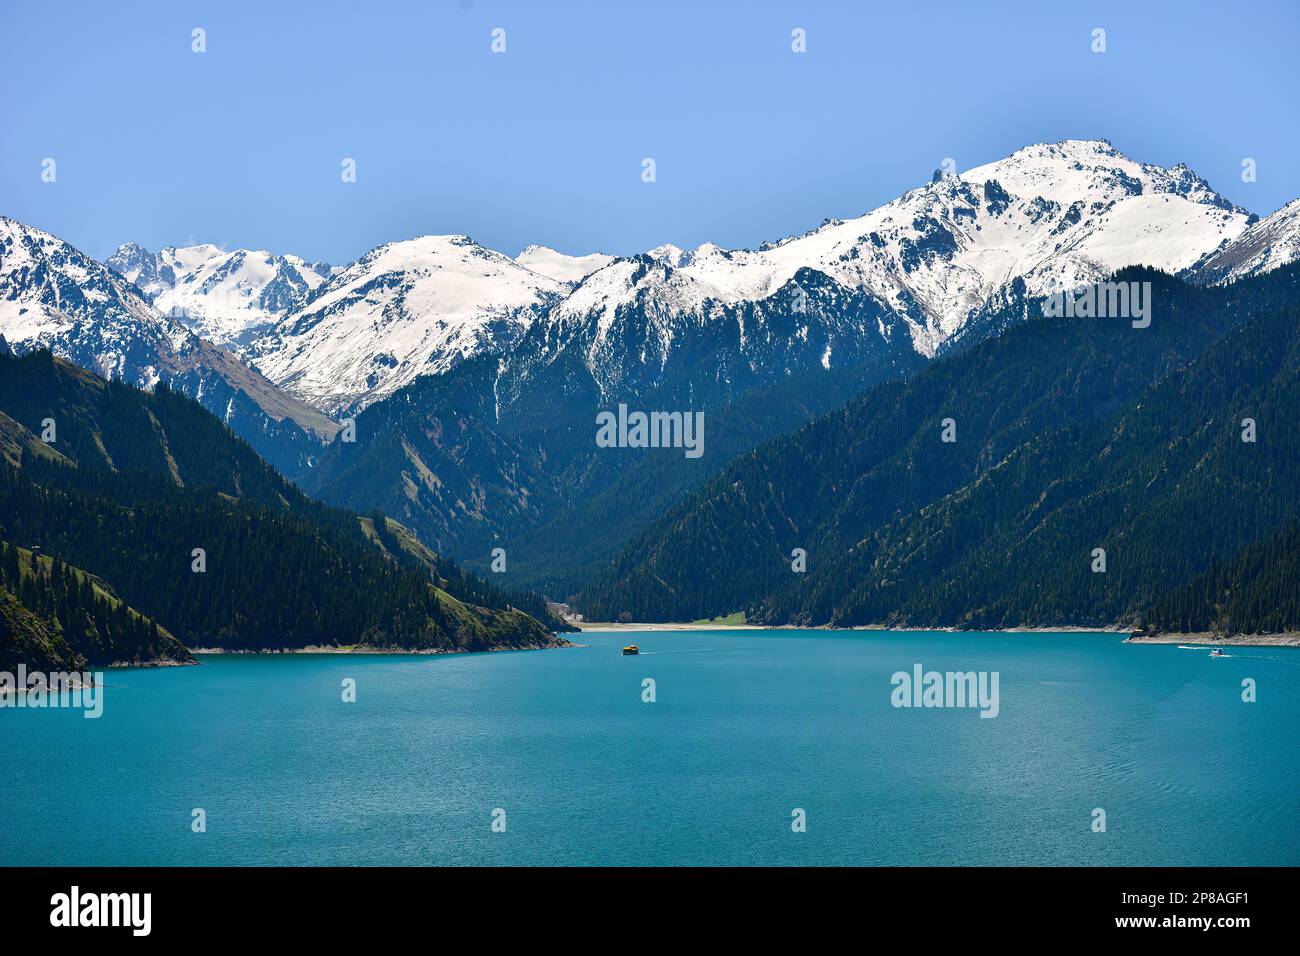 The beautiful landscape of Tianchi Lake in Tianshan Mountains, Xinjiang, with snow-capped mountains in the distance, and the vast and green Tianhu Lak Stock Photo